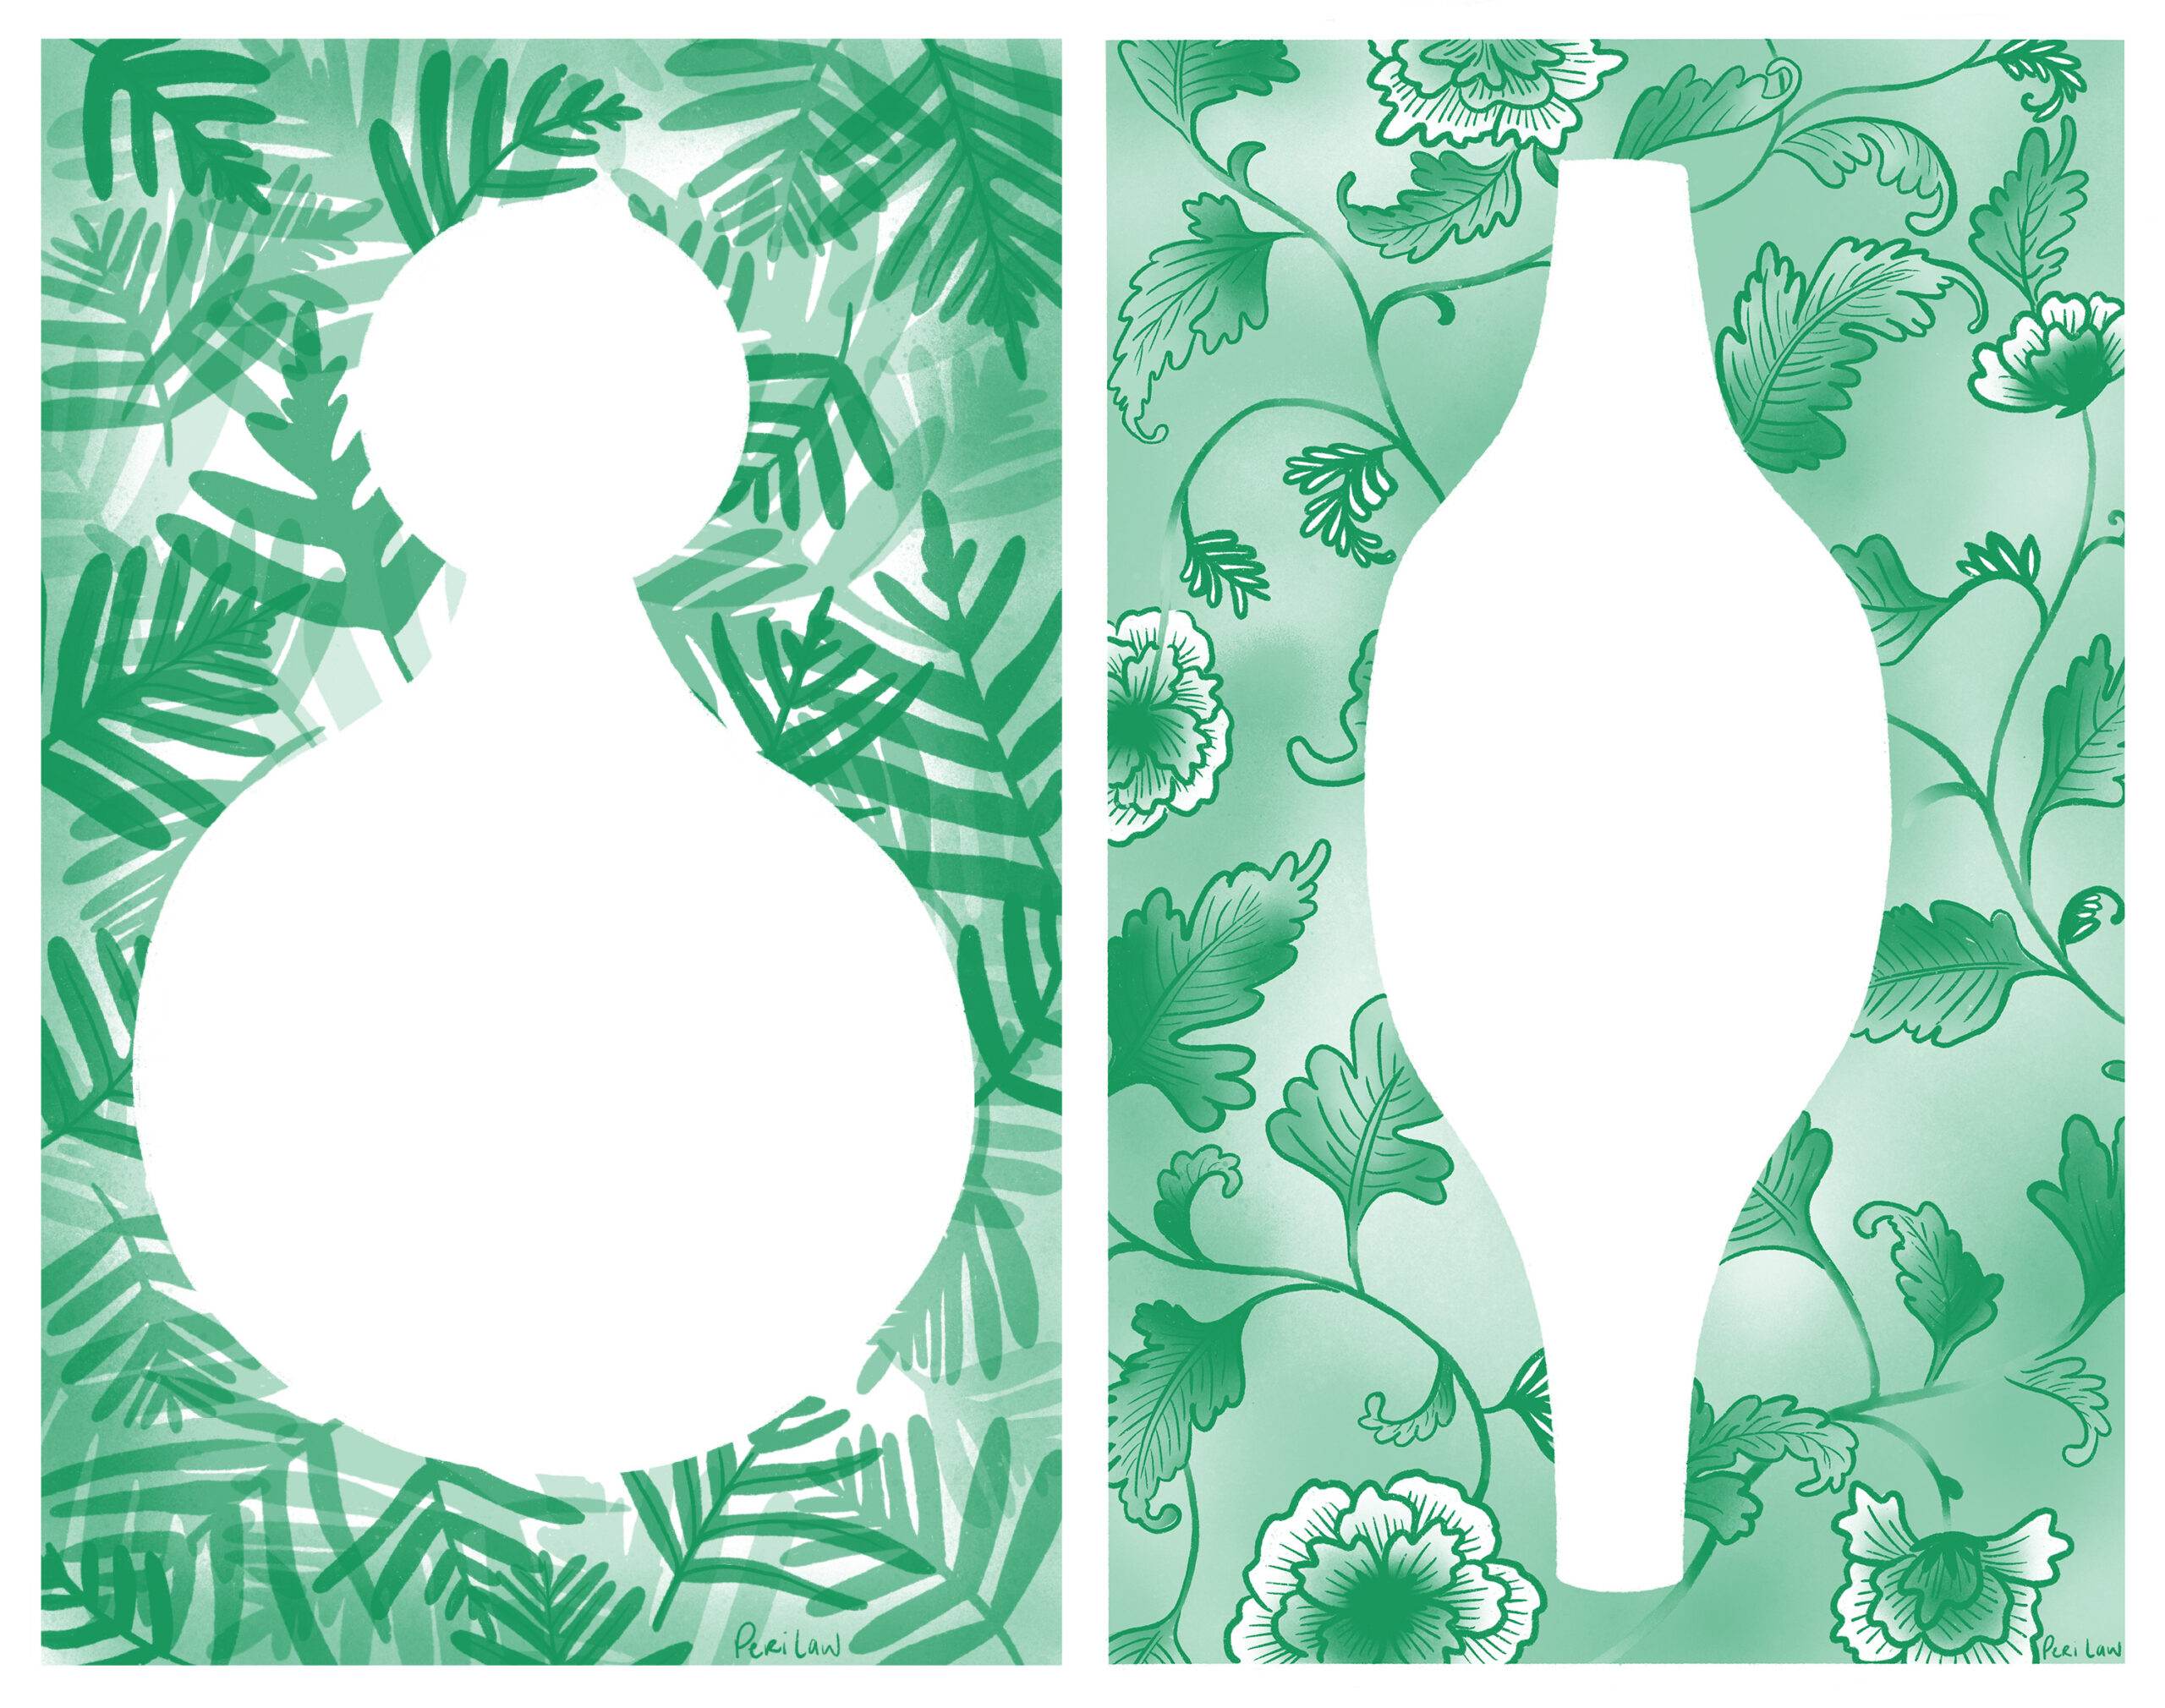 Riso prints designed by artist Peri Law. There are two white shapes – silhouettes of Maren Hassinger's "Steel Bodies," which are unique vessel-type steel sculptures. Framing the shapes are green leafy patterns.